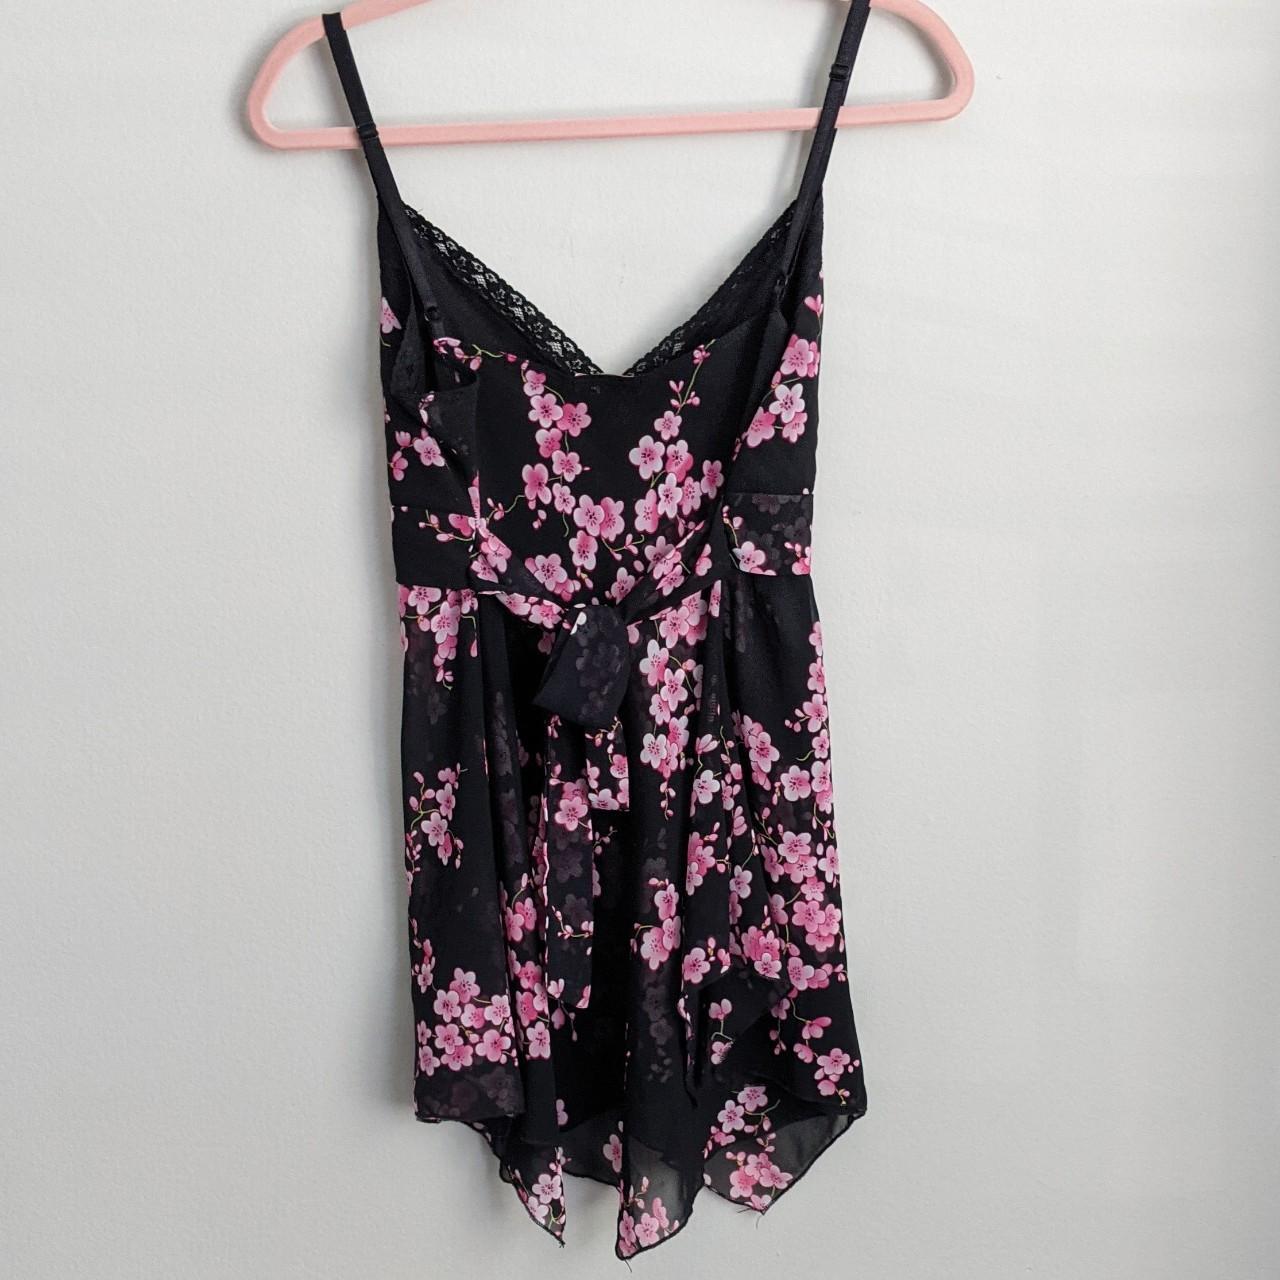 Product Image 3 - Sheer Floral Cami Top

Condition: Excellent